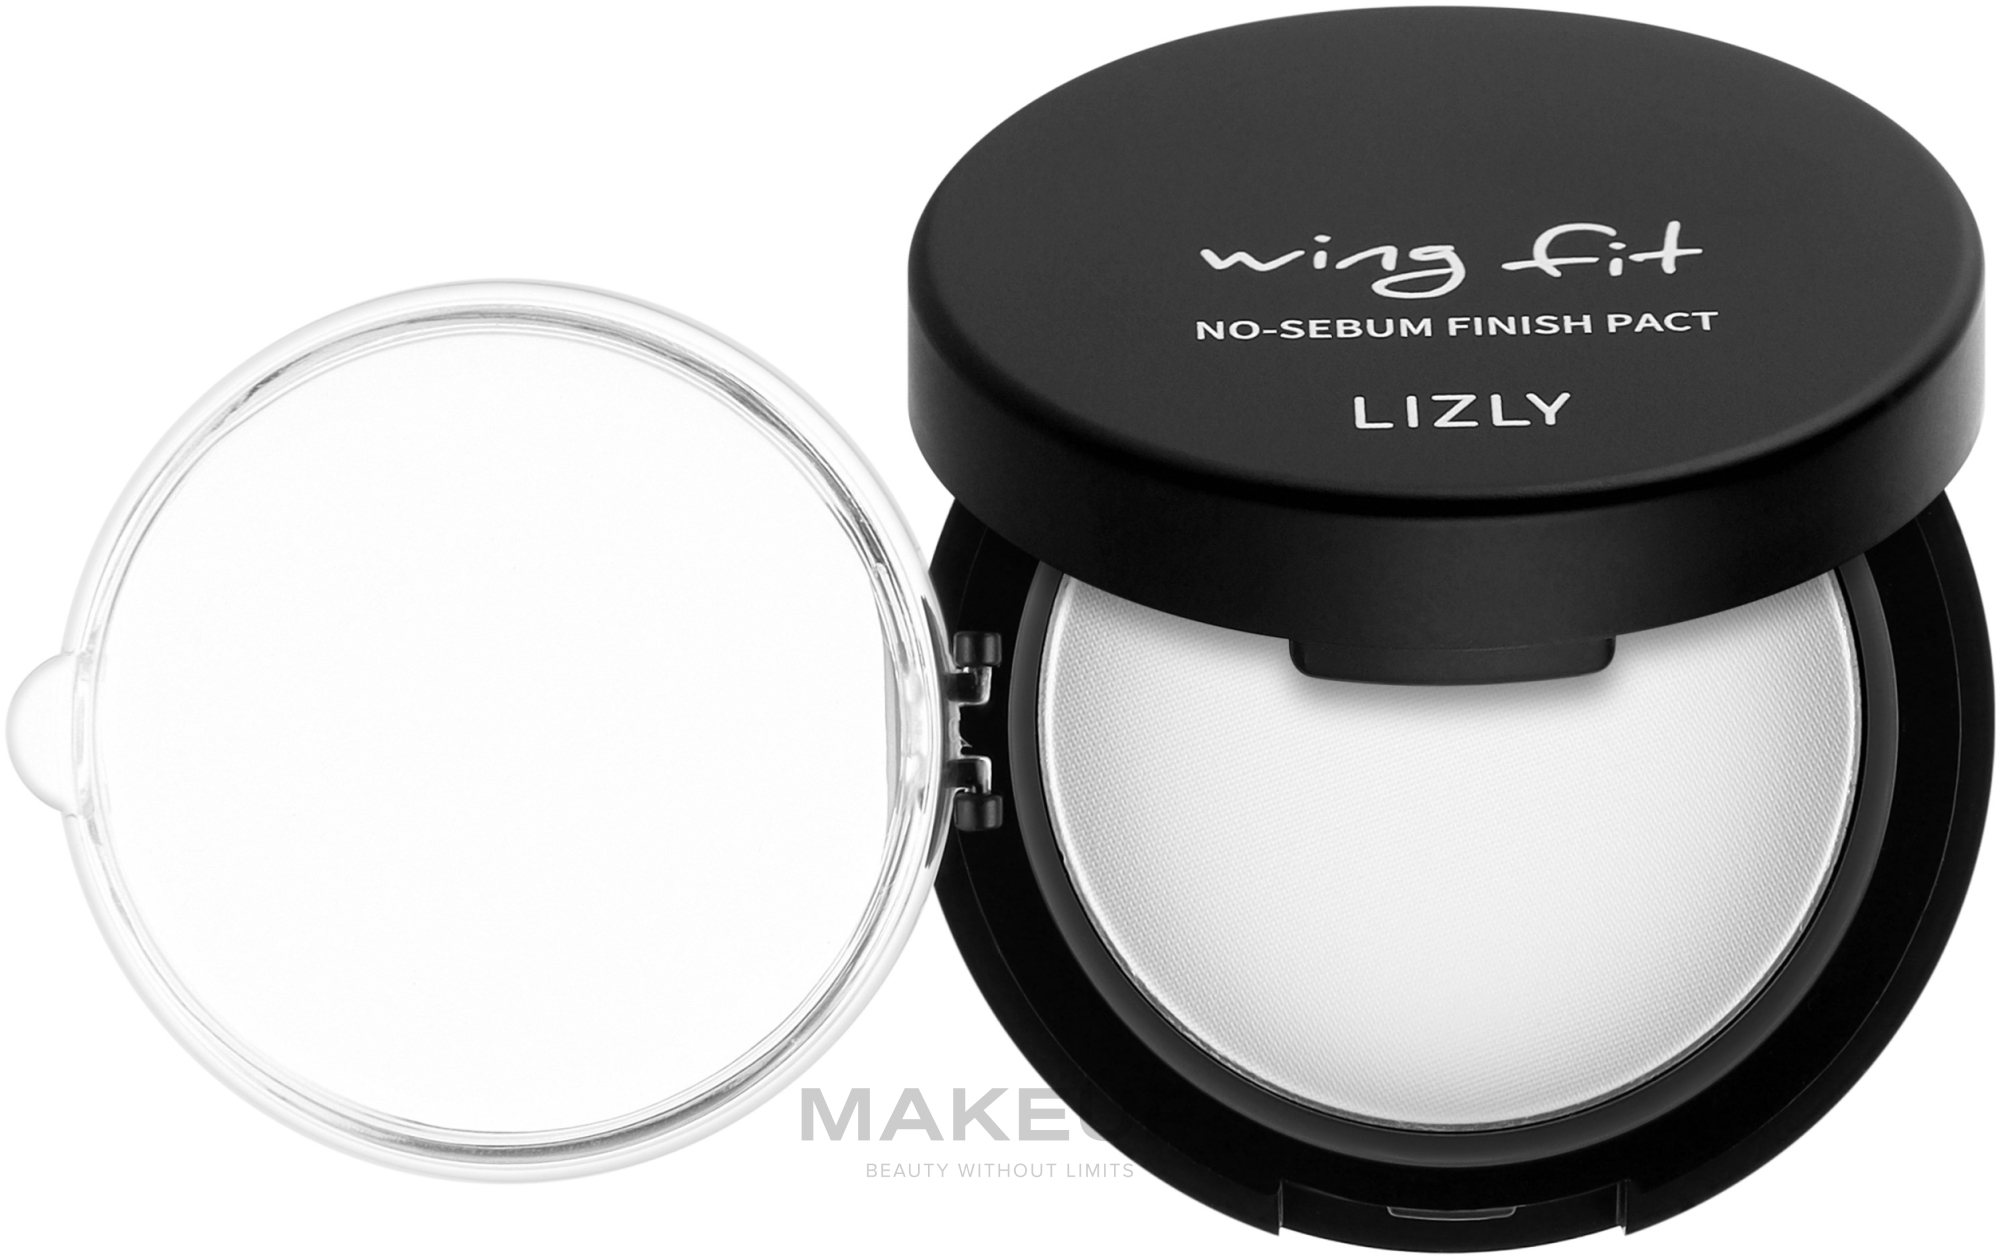 Lizly Wing Fit No-Sebum Finish Pact - Lizly Wing Fit No-Sebum Finish Pact — фото 6g